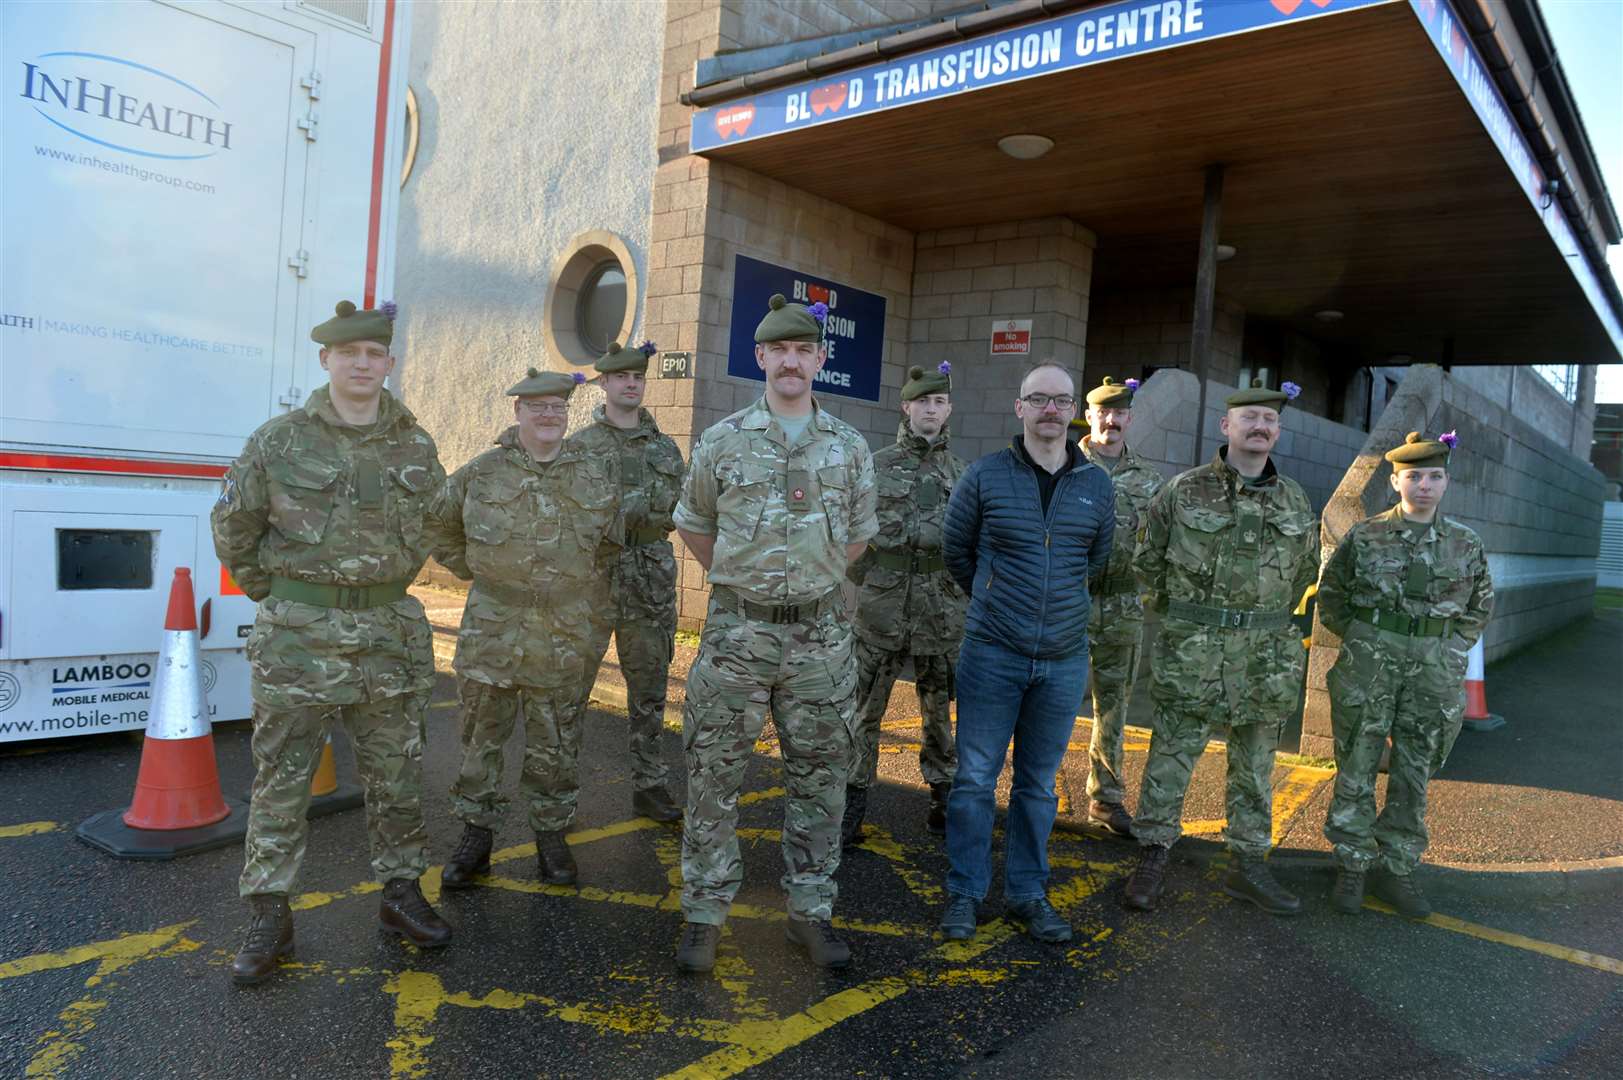 Pte Peter Martin, Sgt Thomas Stewart, Lt Michael Hunter, Maj (OC) Malcolm Dalzel-Job, Pte William Mansfield-Townsend, CSgt Andrew Braid, Sgt Peter Ball, WO2 (CSM) Colin Smith and Pte Lizzie Donner.